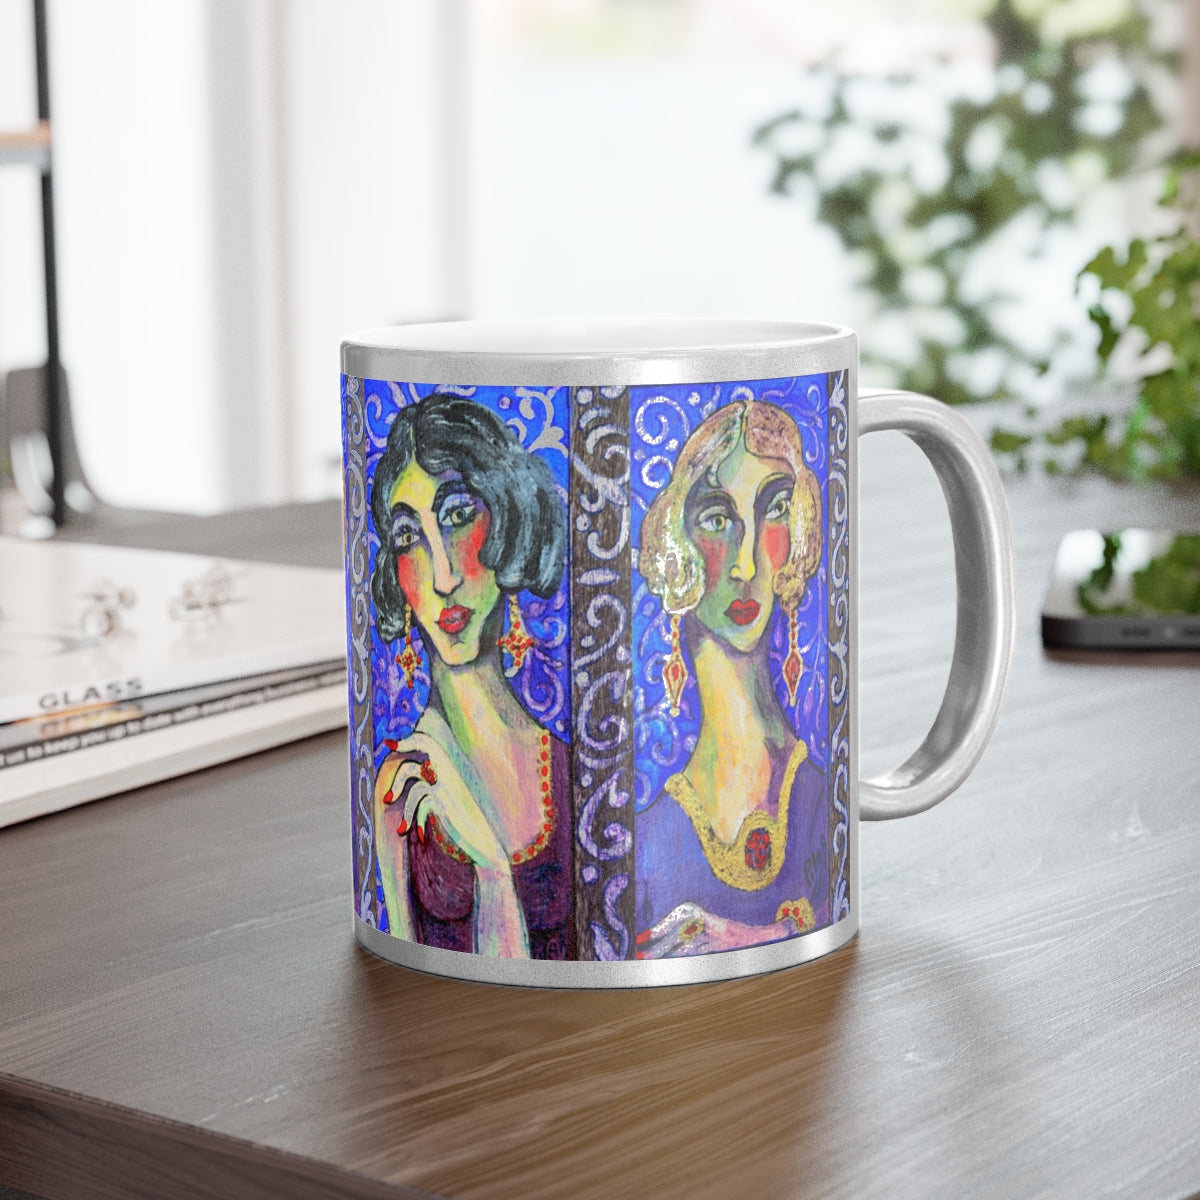 Metallic Mug Bathed in Silver or Gold "Les Parisiennes"